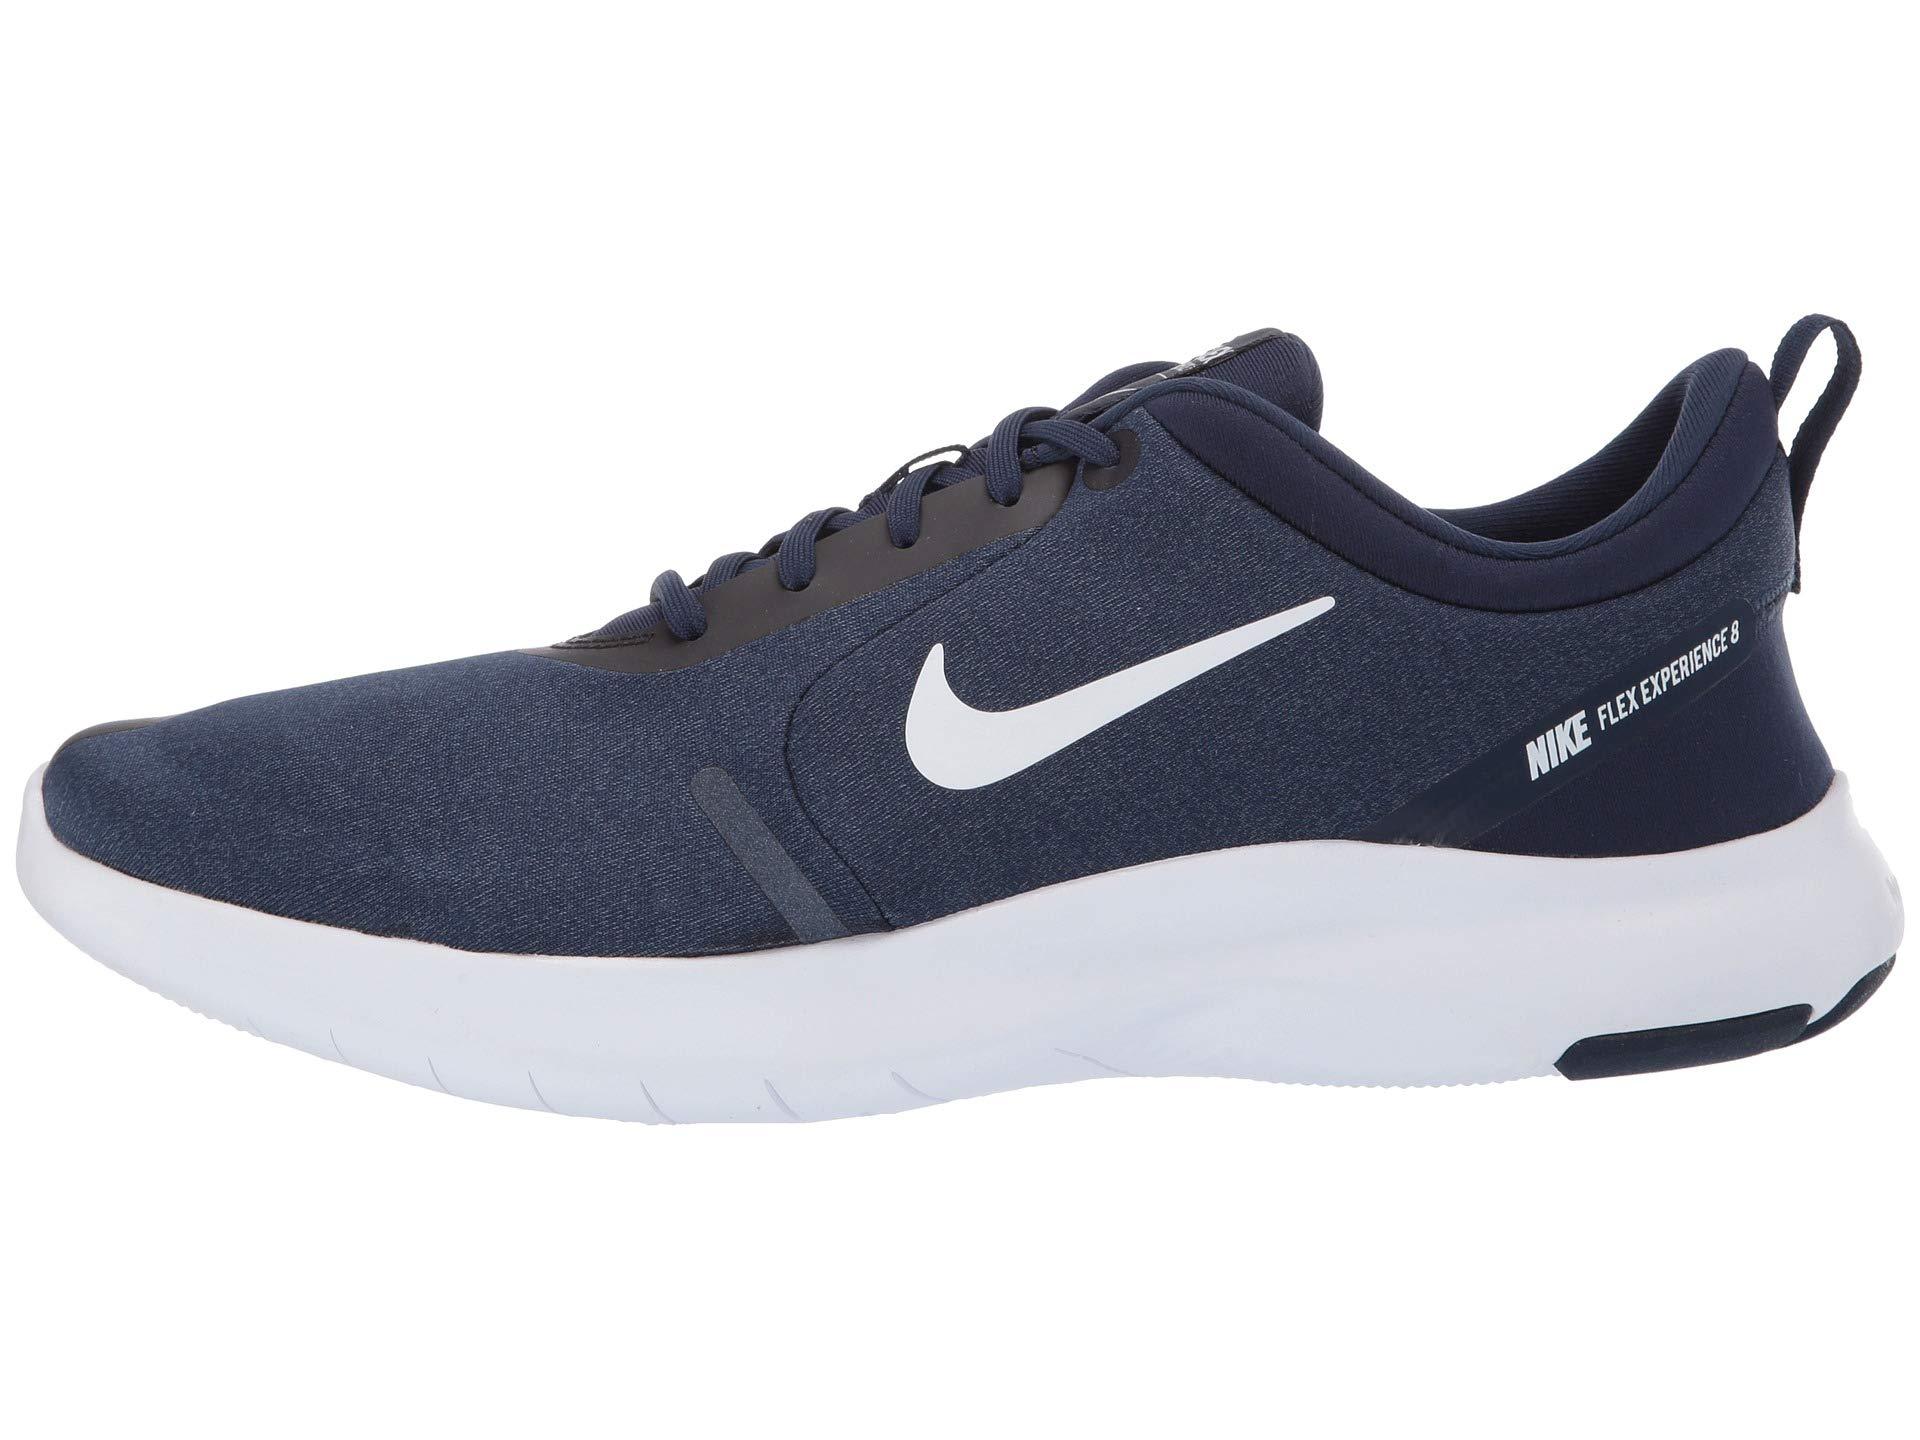 Nike Flex Experience Rn 8 Running Shoes in Blue for Lyst